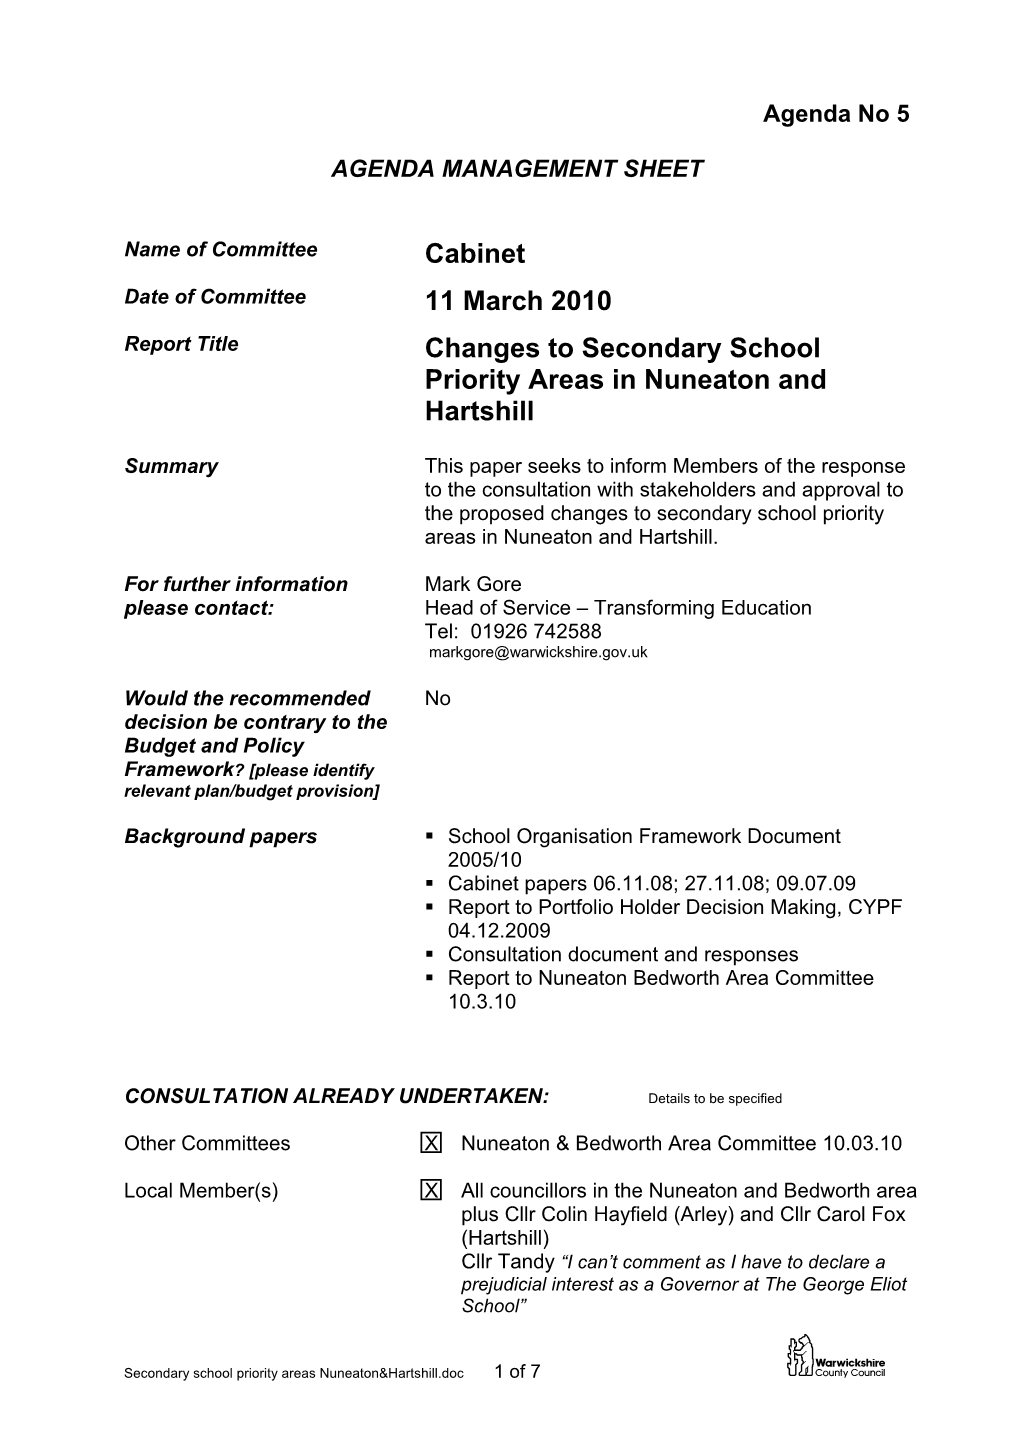 Cabinet 11 March 2010 Changes to Secondary School Priority Areas in Nuneaton and Hartshill